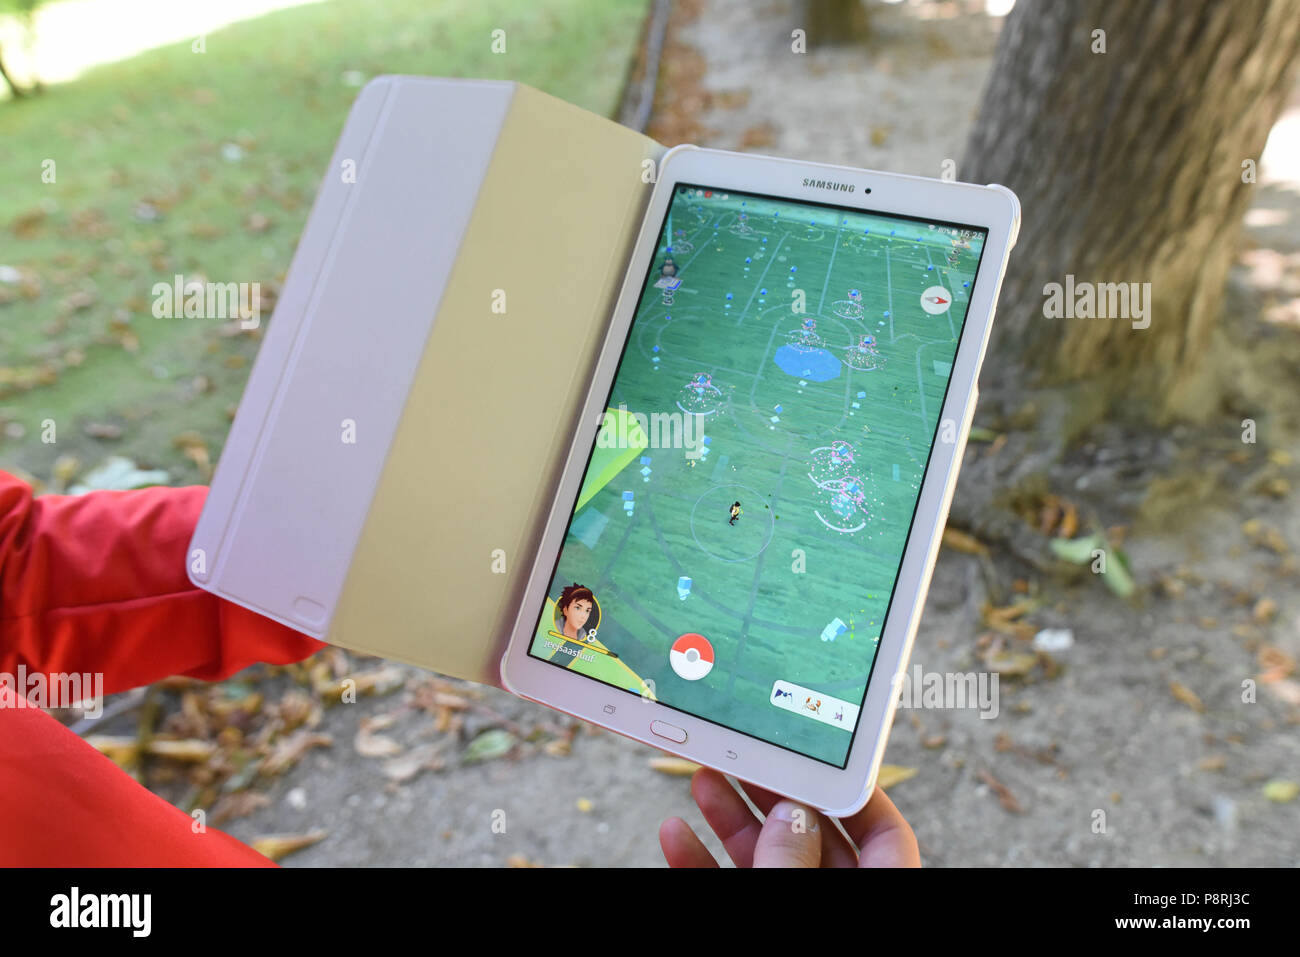 July 14, 2016 - Paris, France: A player shows the map on his tablet as he takes part in a mass Pokemon hunt in the Luxembourg Garden in central Paris. Hundreds of players of the new Pokemon Go game showed up to take part in a massive hunt despite the authorities' attempt to cancel the event. Despite playing mostly solo, the Pokemon Go users enjoyed to interact and meet other players. Millions of users have already downloaded the game, which requires users to catch on-screen pokemon characters using their real-world location.  Des jeunes participent a une chasse au Pokemons dans le jardin du Lu Stock Photo